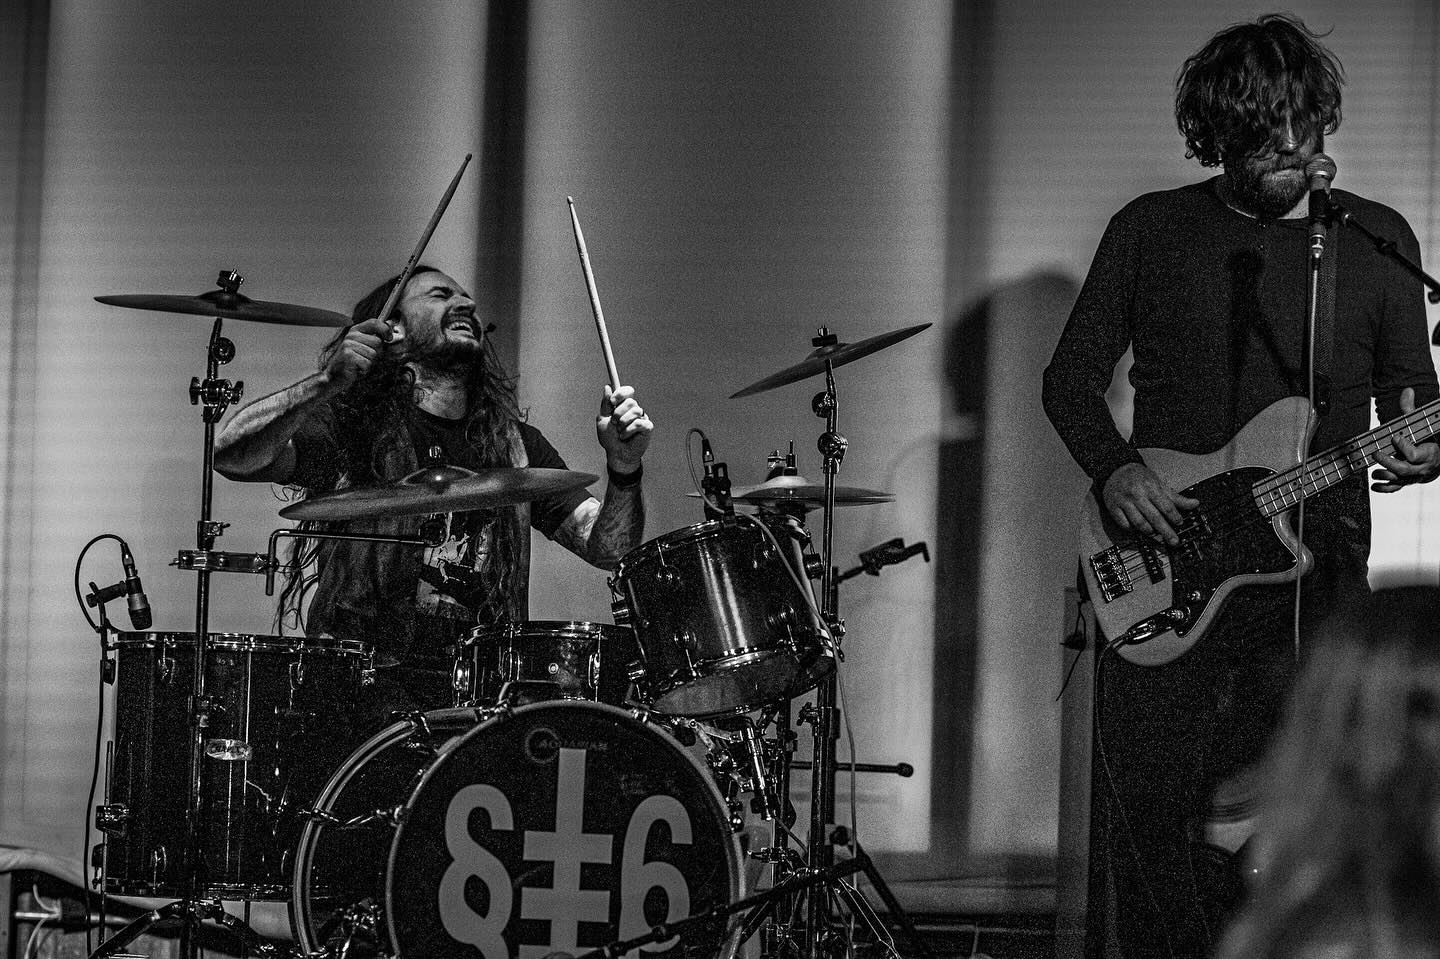 Black and white image of rock band Stereo Christ, showing Keith Moucha on drums and vocals and Douglas Gluth on bass guitar.